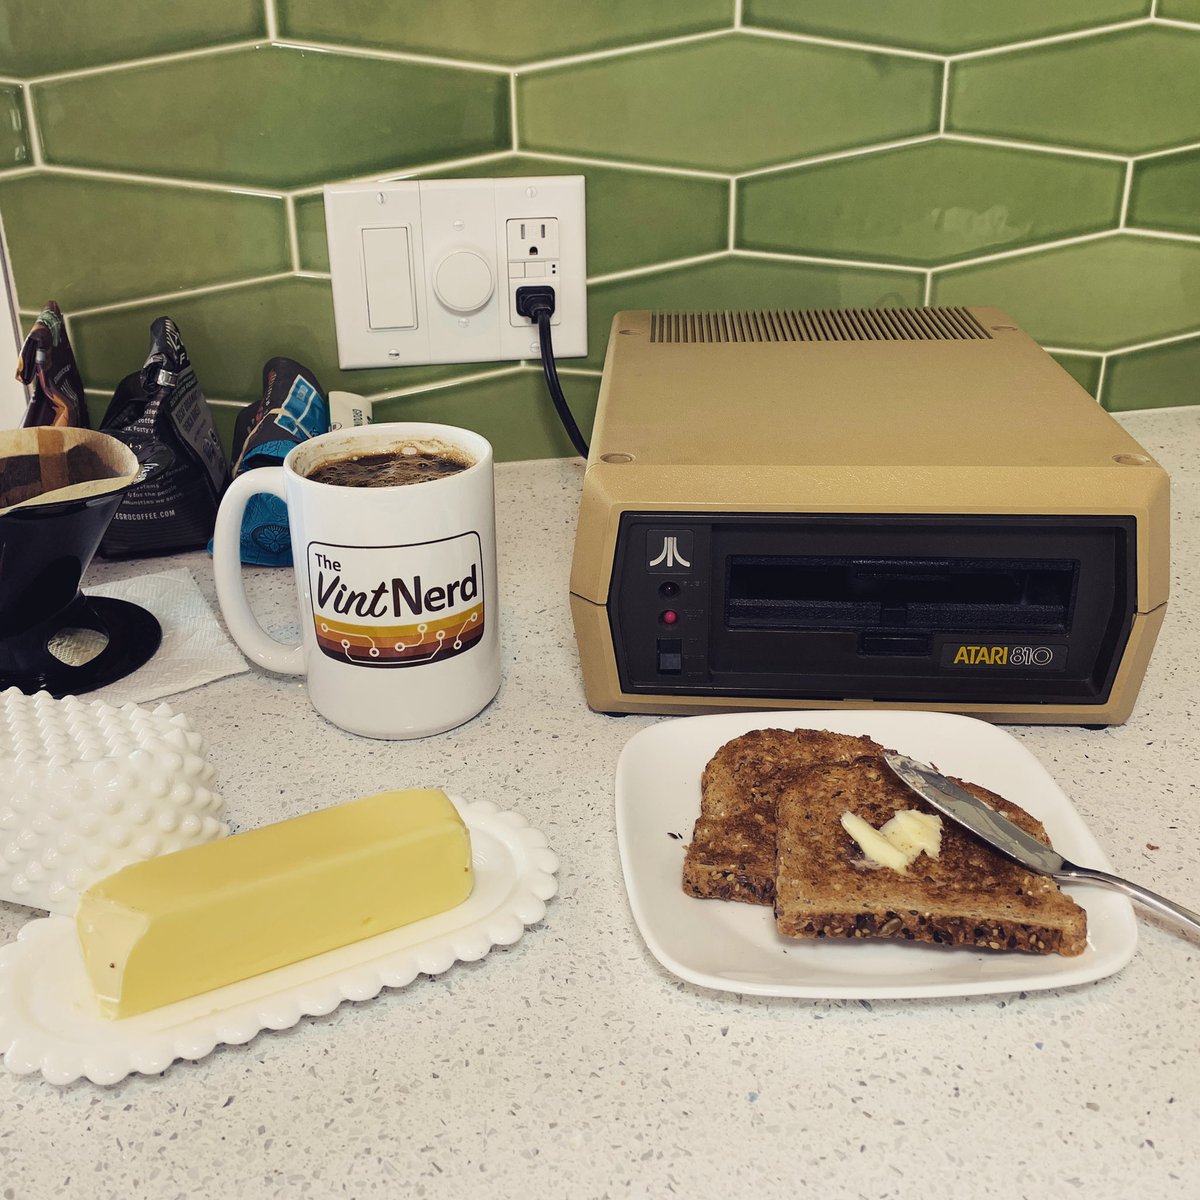 Fun getting out the old toaster! Later models would do double-sided browning, and denser bread.

#atari #atari8bit #atari810 #retrotoaster #melitta #thebestpartofwakingup #vintagecomputing #retrocomputers #retrogaming #thevintnerd